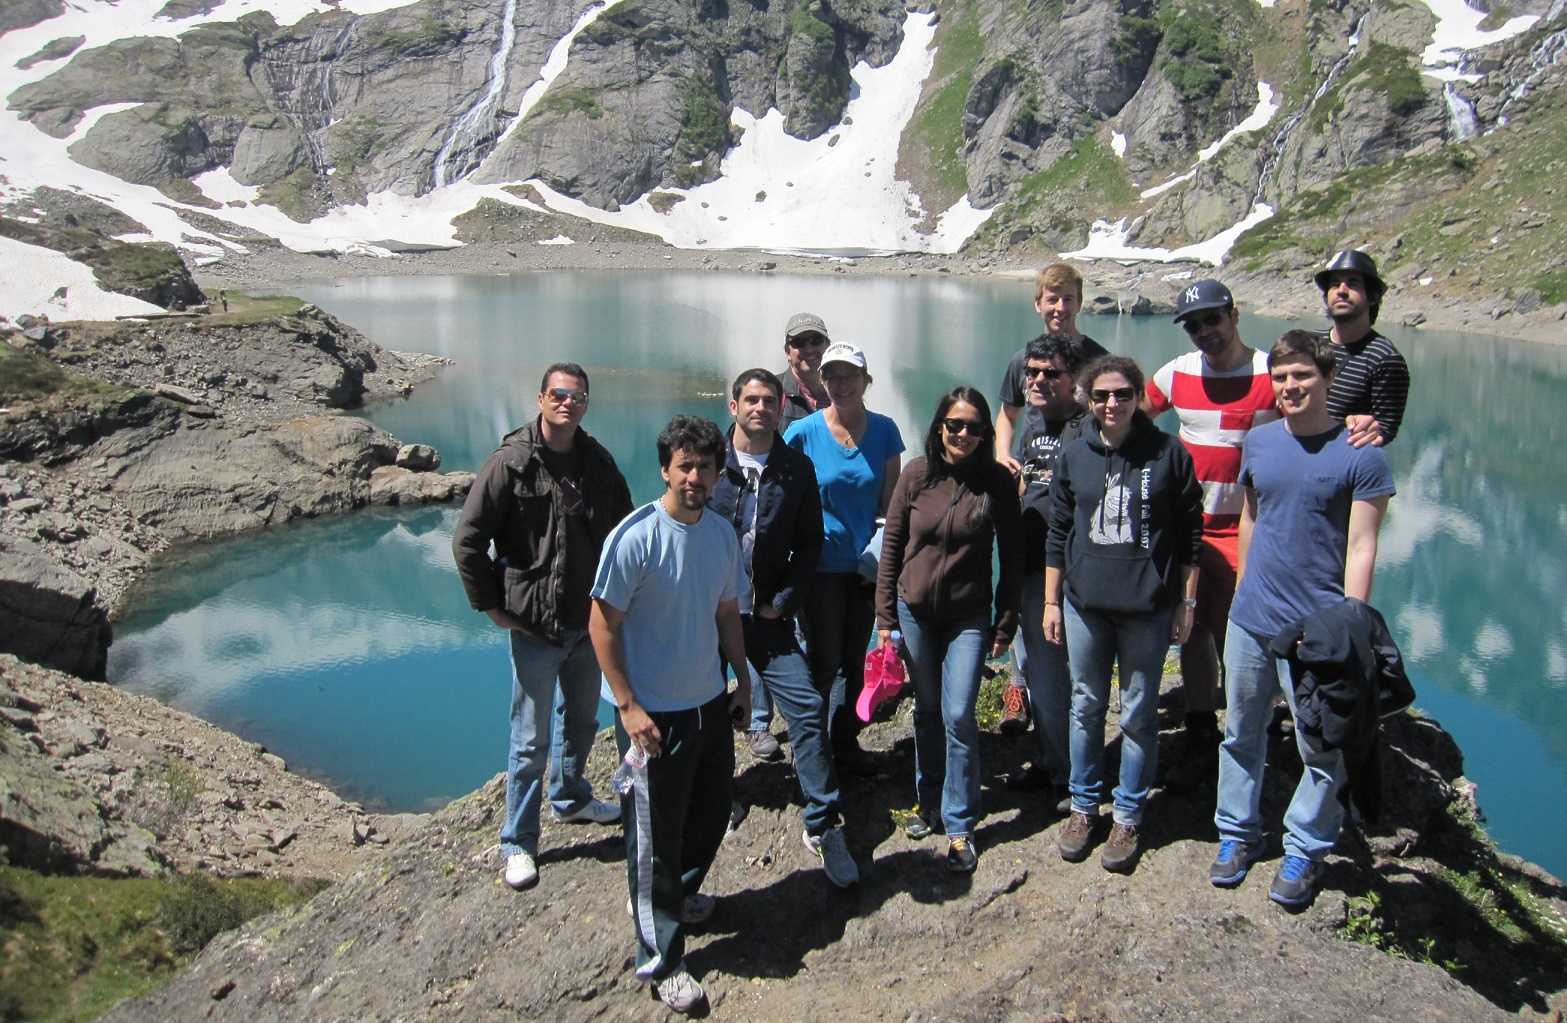 Field excursion to Maggia Valley